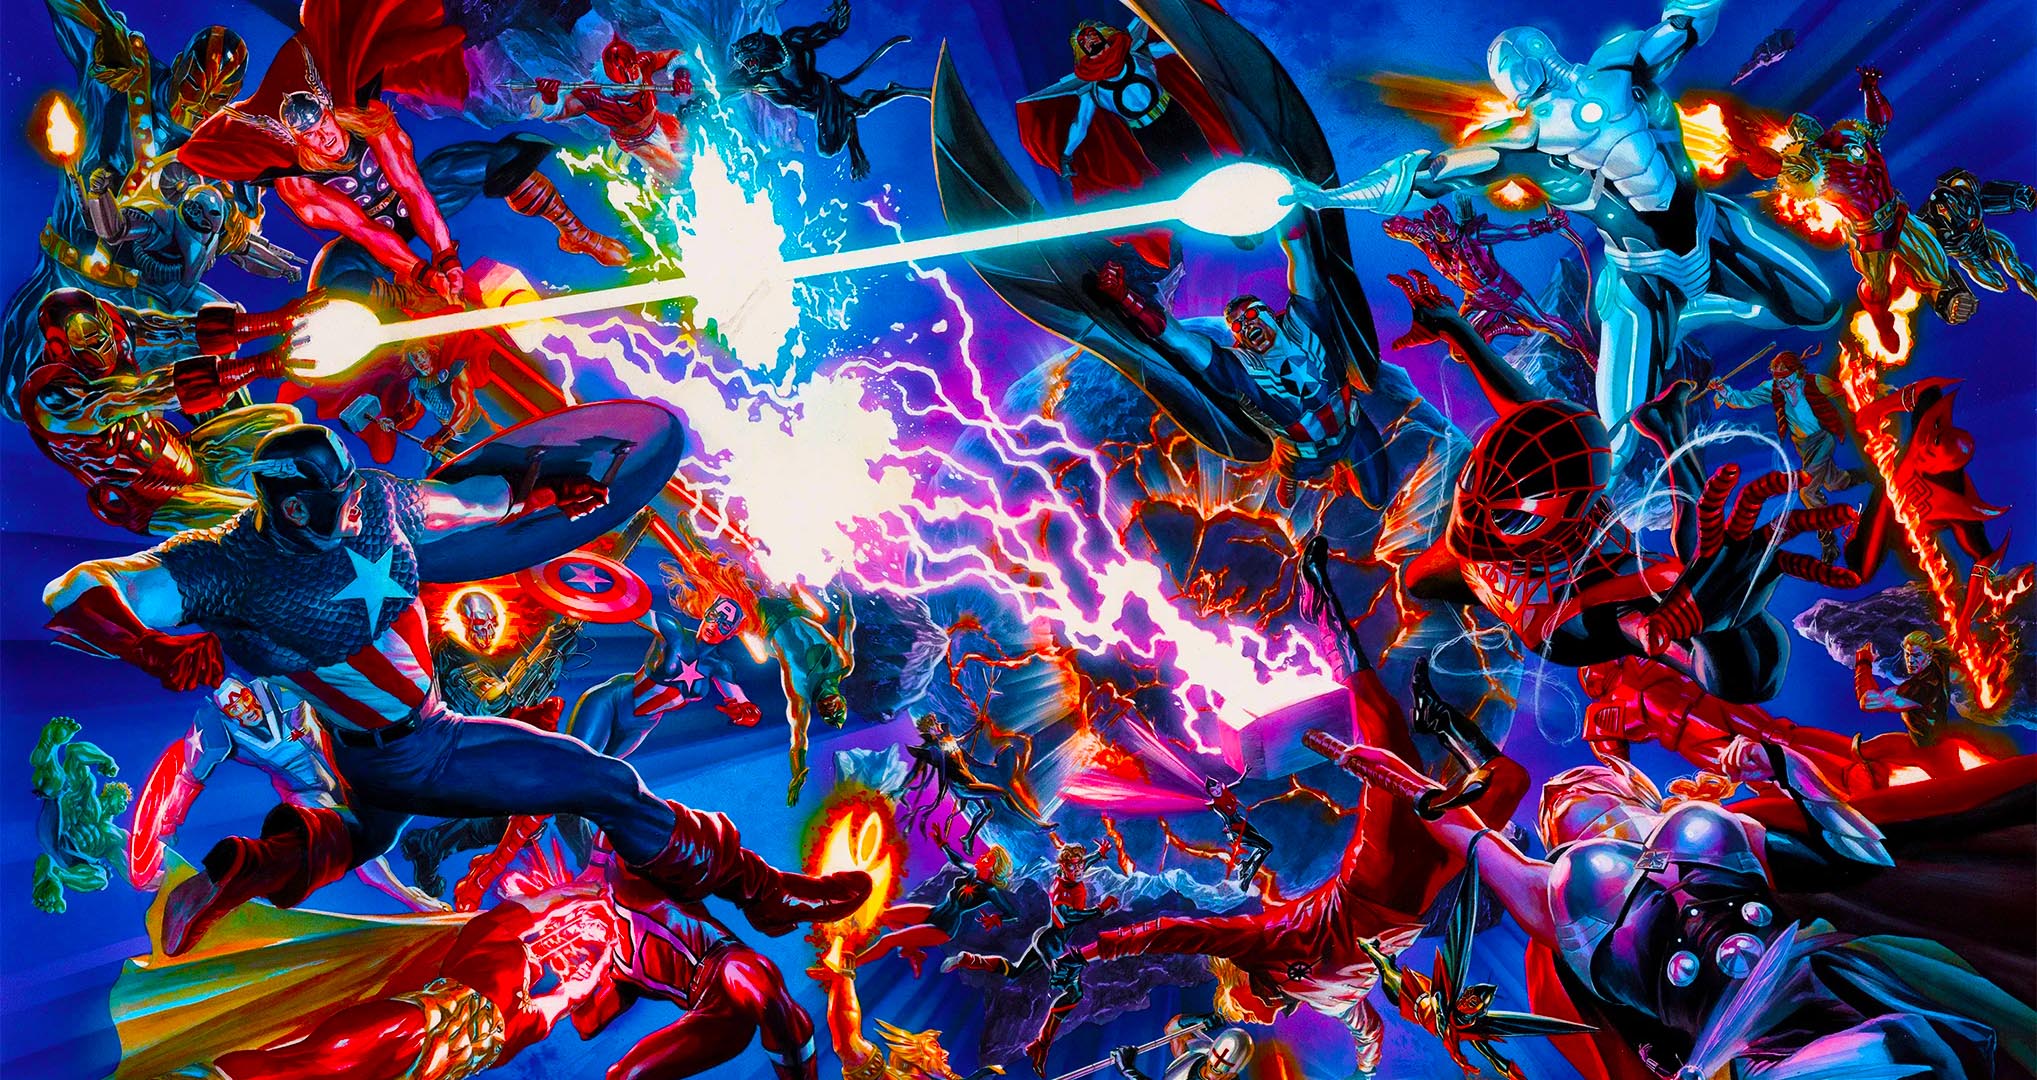 The Russo Brothers Secret Wars Movie